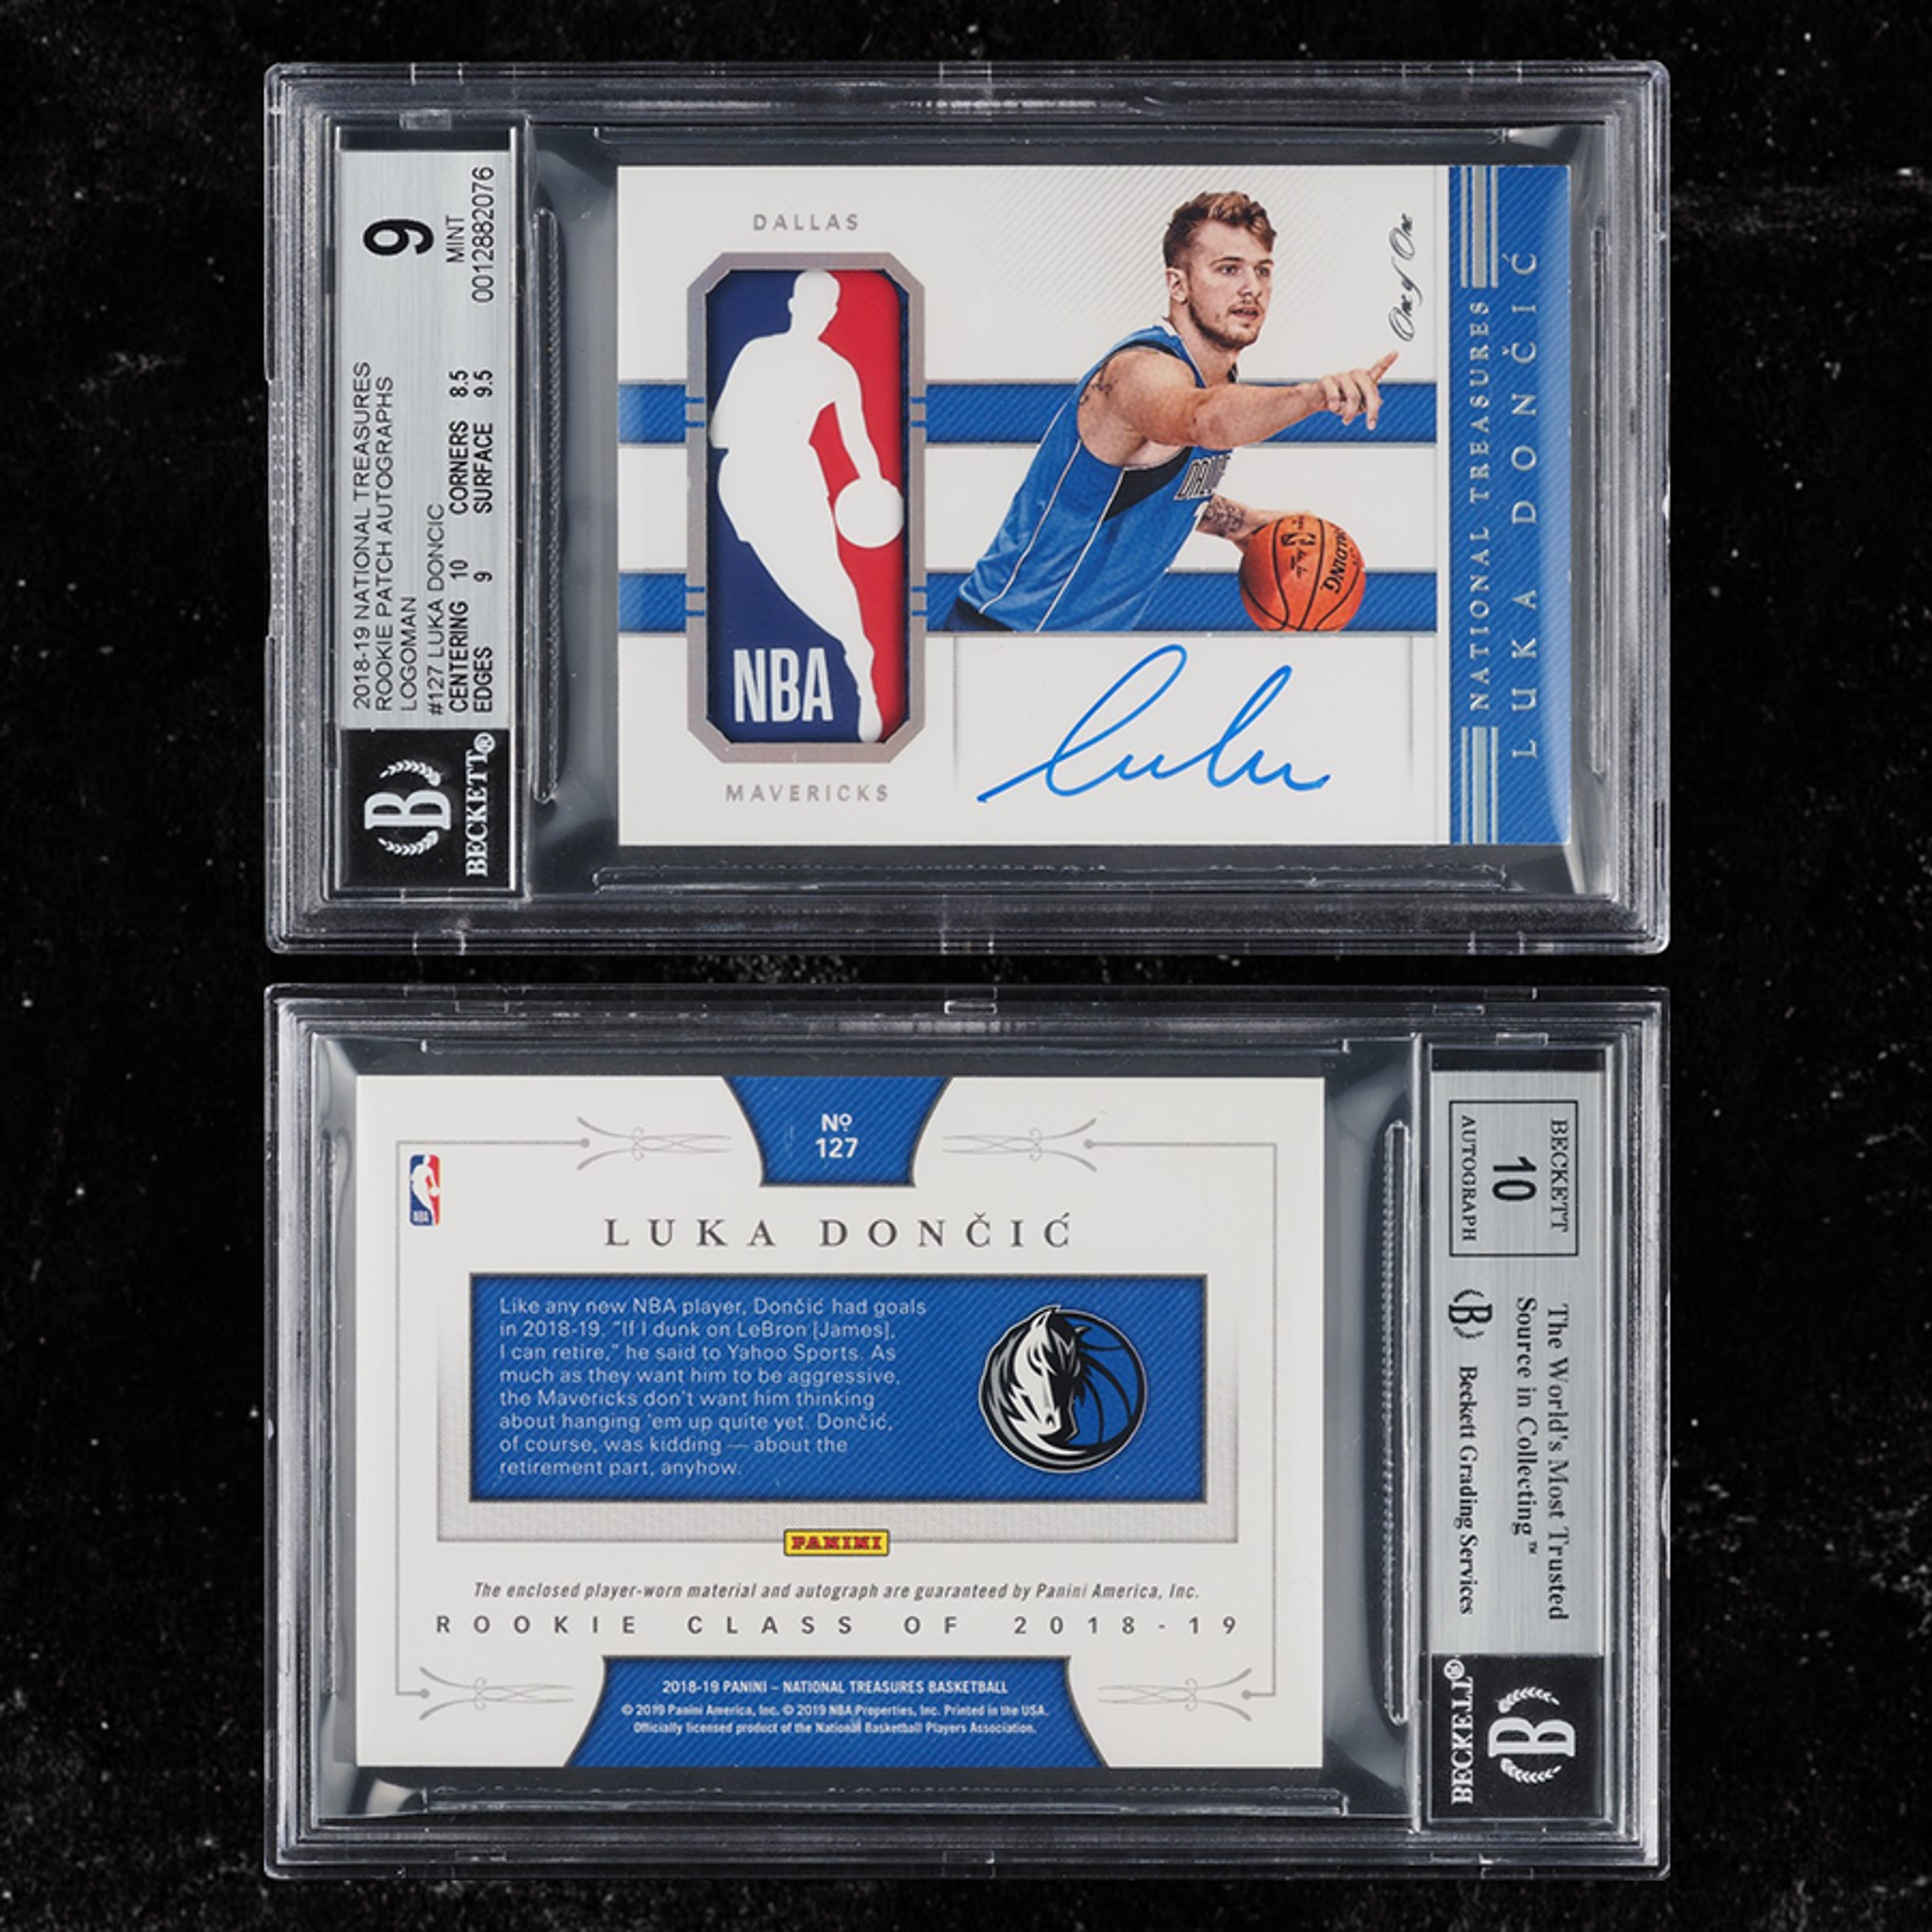 LeBron James's Signed Rookie Card Sells for a Record $5.2 Million